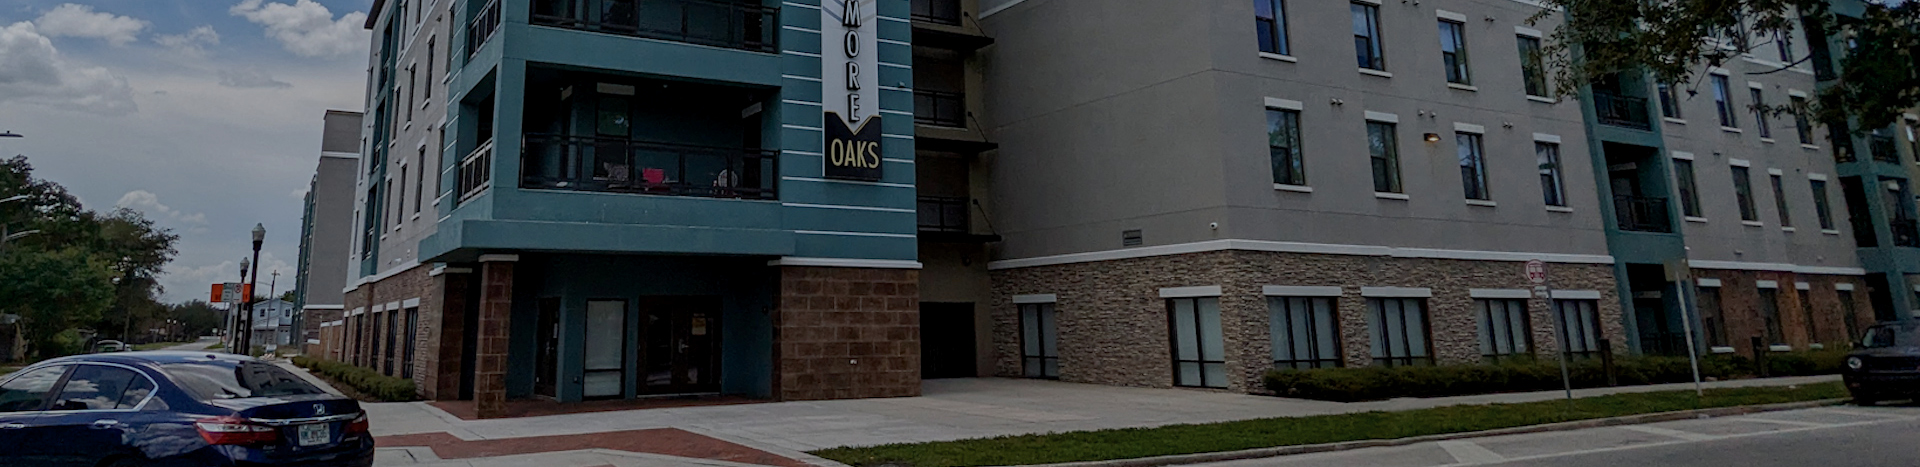 Exterior view of Parramore Oaks, an affordable housing development in Orlando, Florida. 